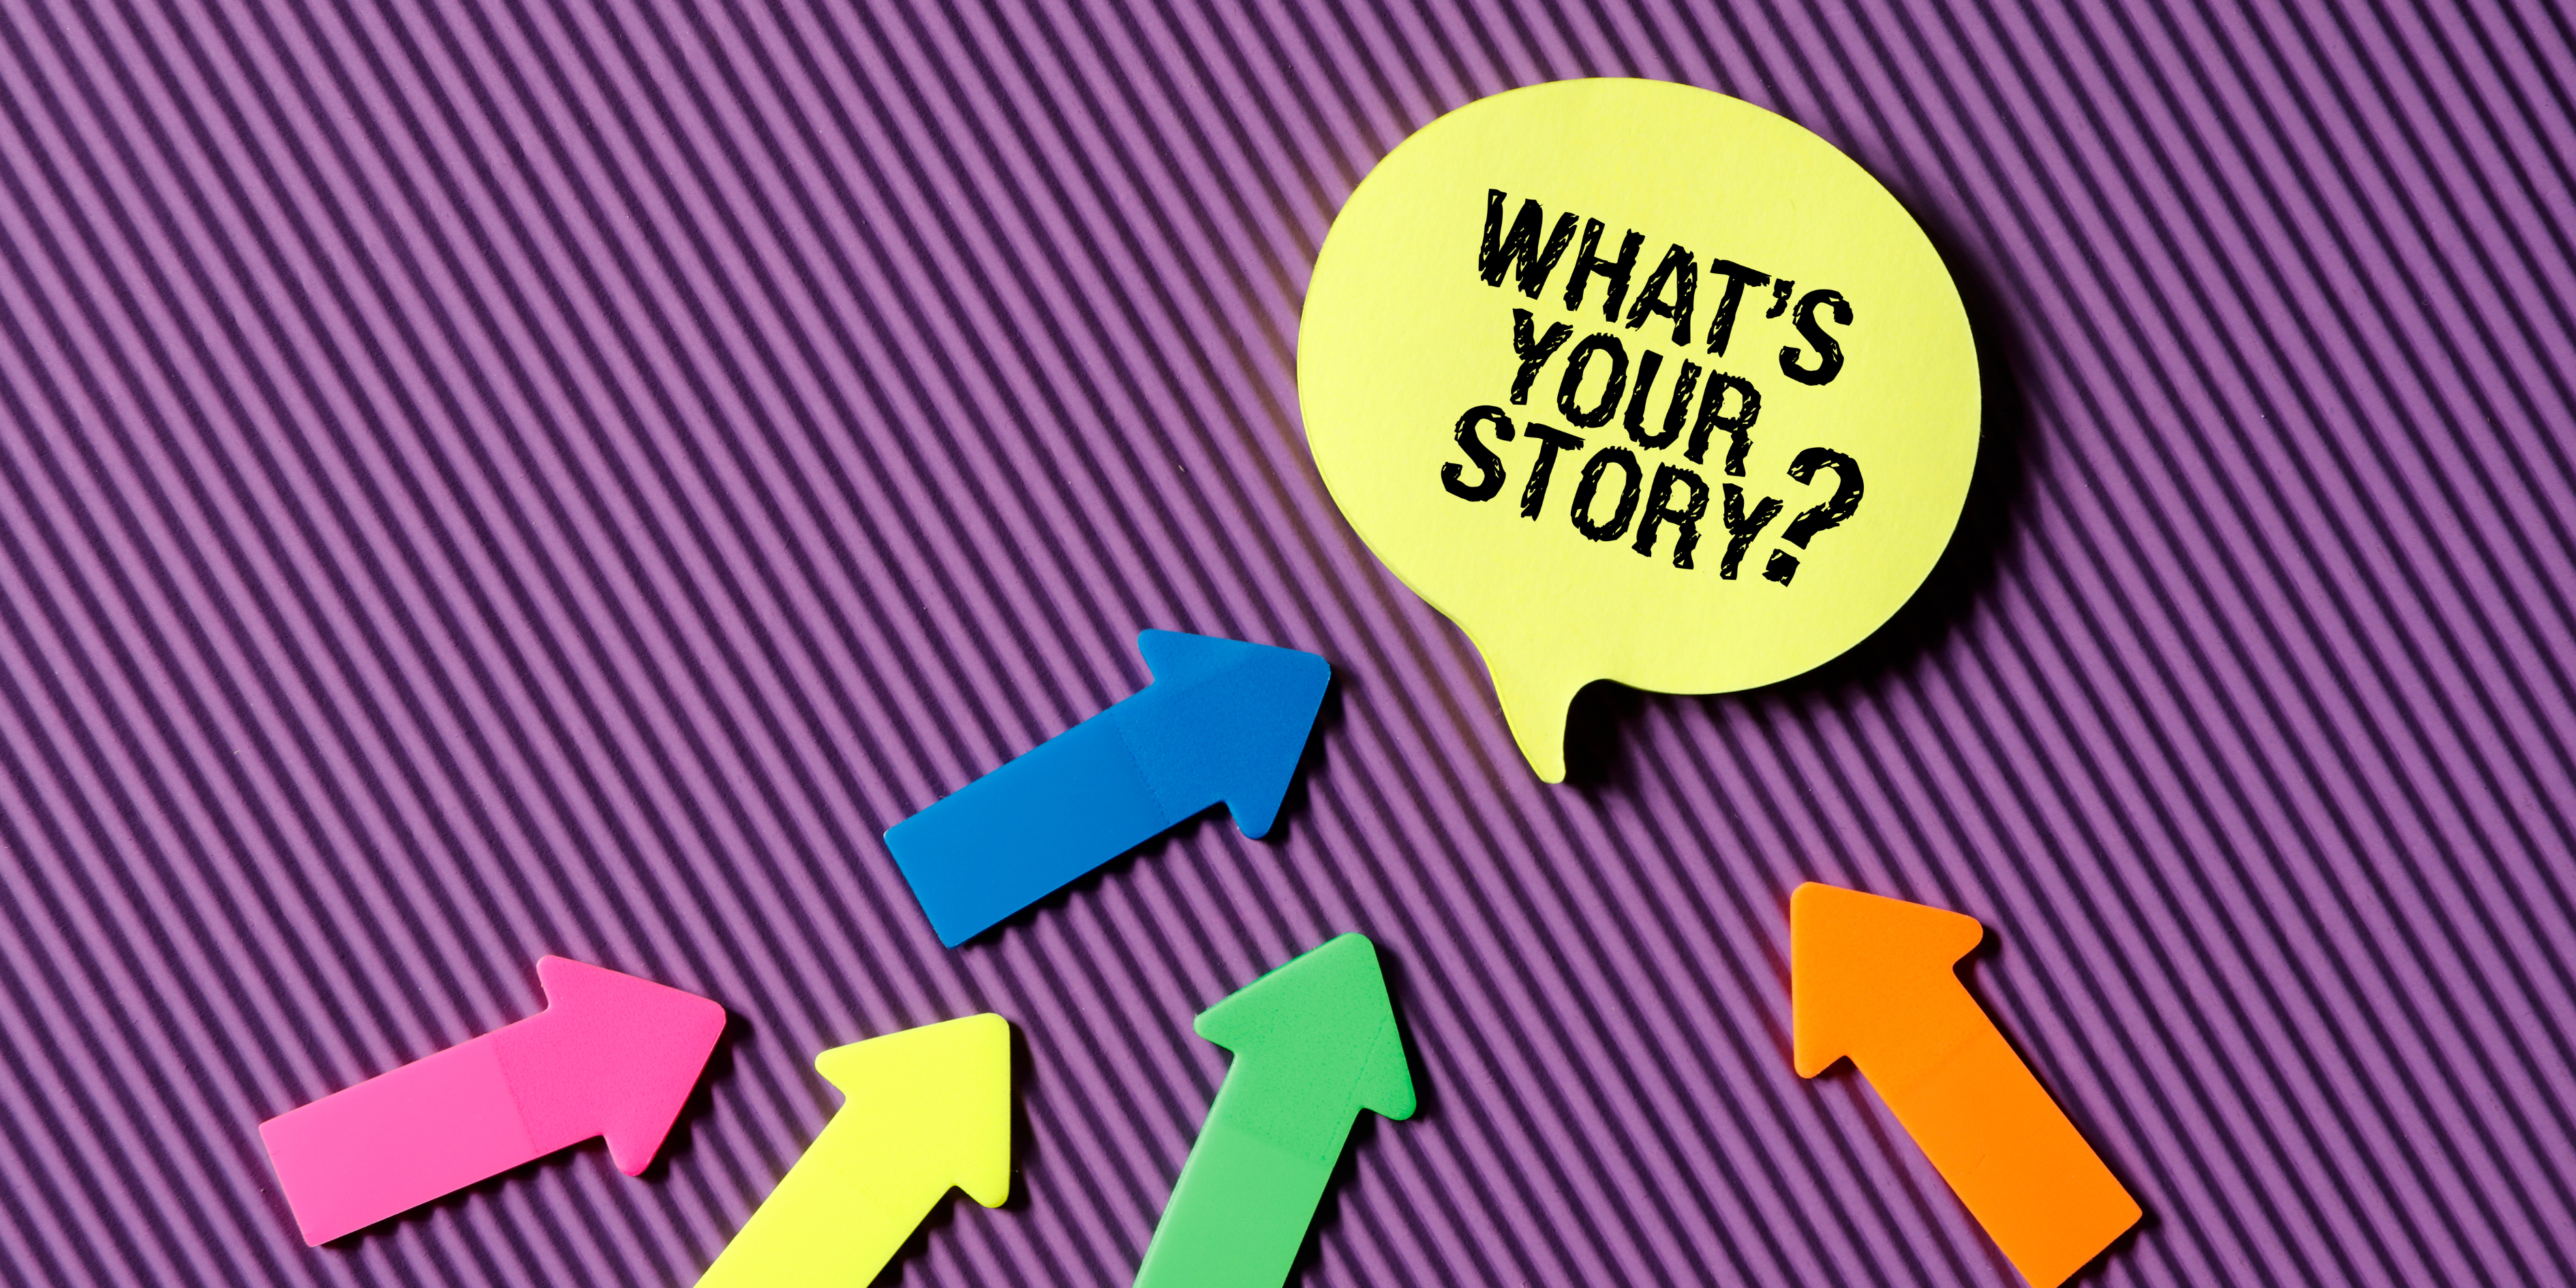 What's your story as a stimulus question